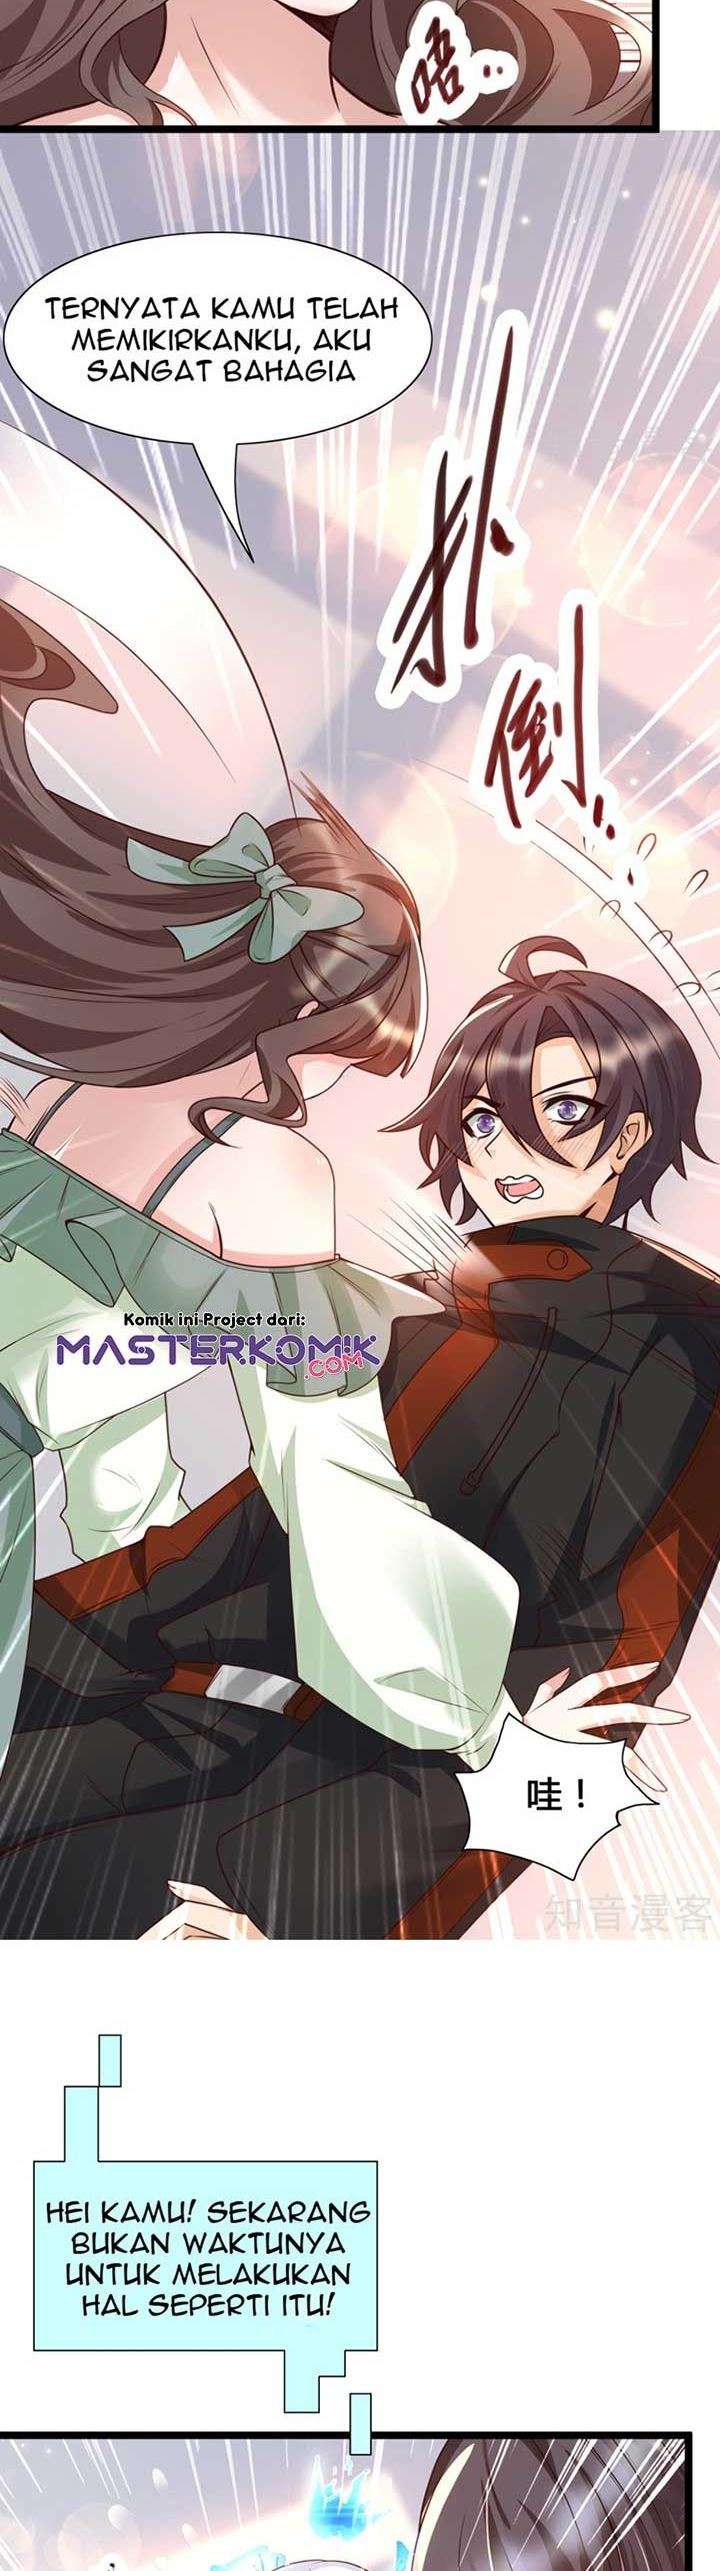 The Goddes Took Me To Be a Master Chapter 20